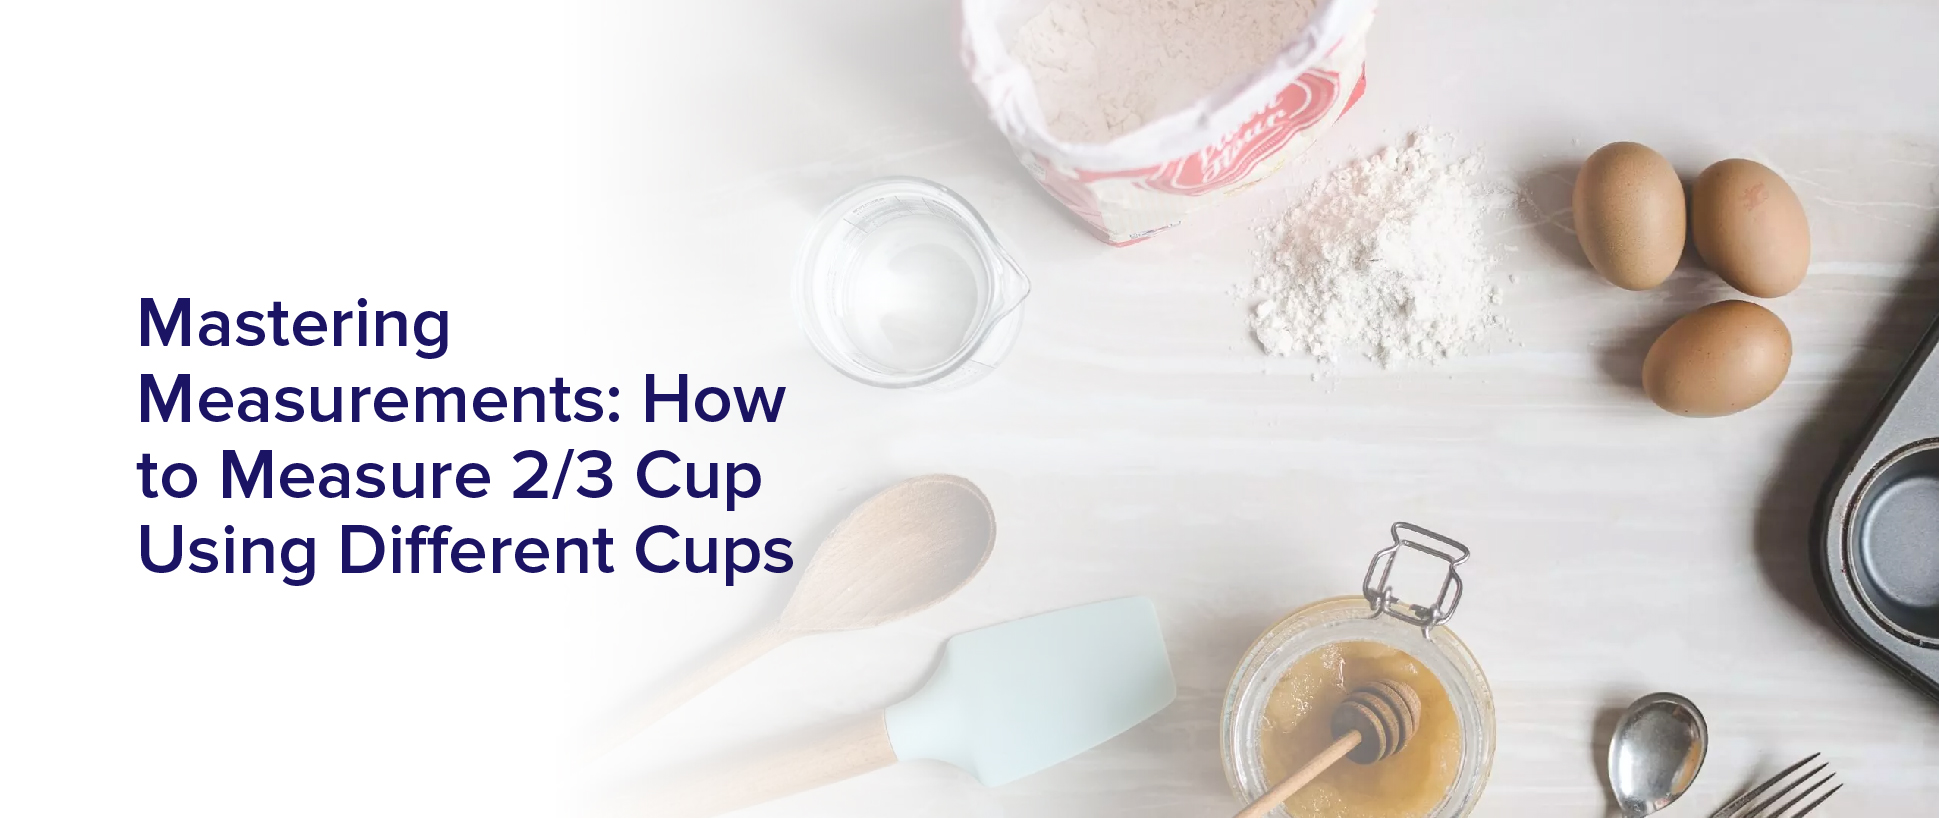 Mastering Measurements: How To Measure 2/3 Cup Using Different Cups”